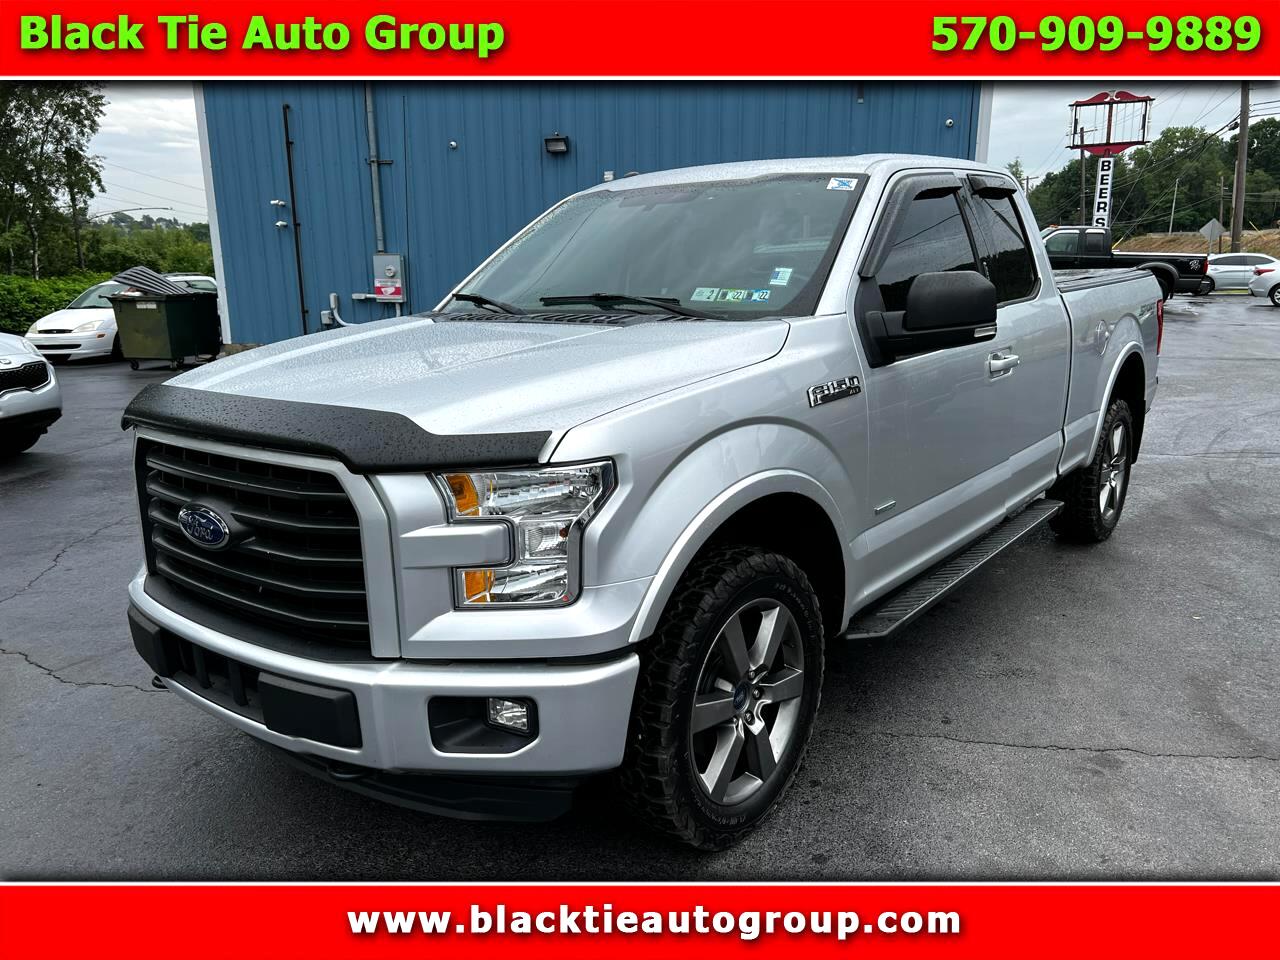 Ford F-150 4WD Supercab Flareside 145" FX4 2015